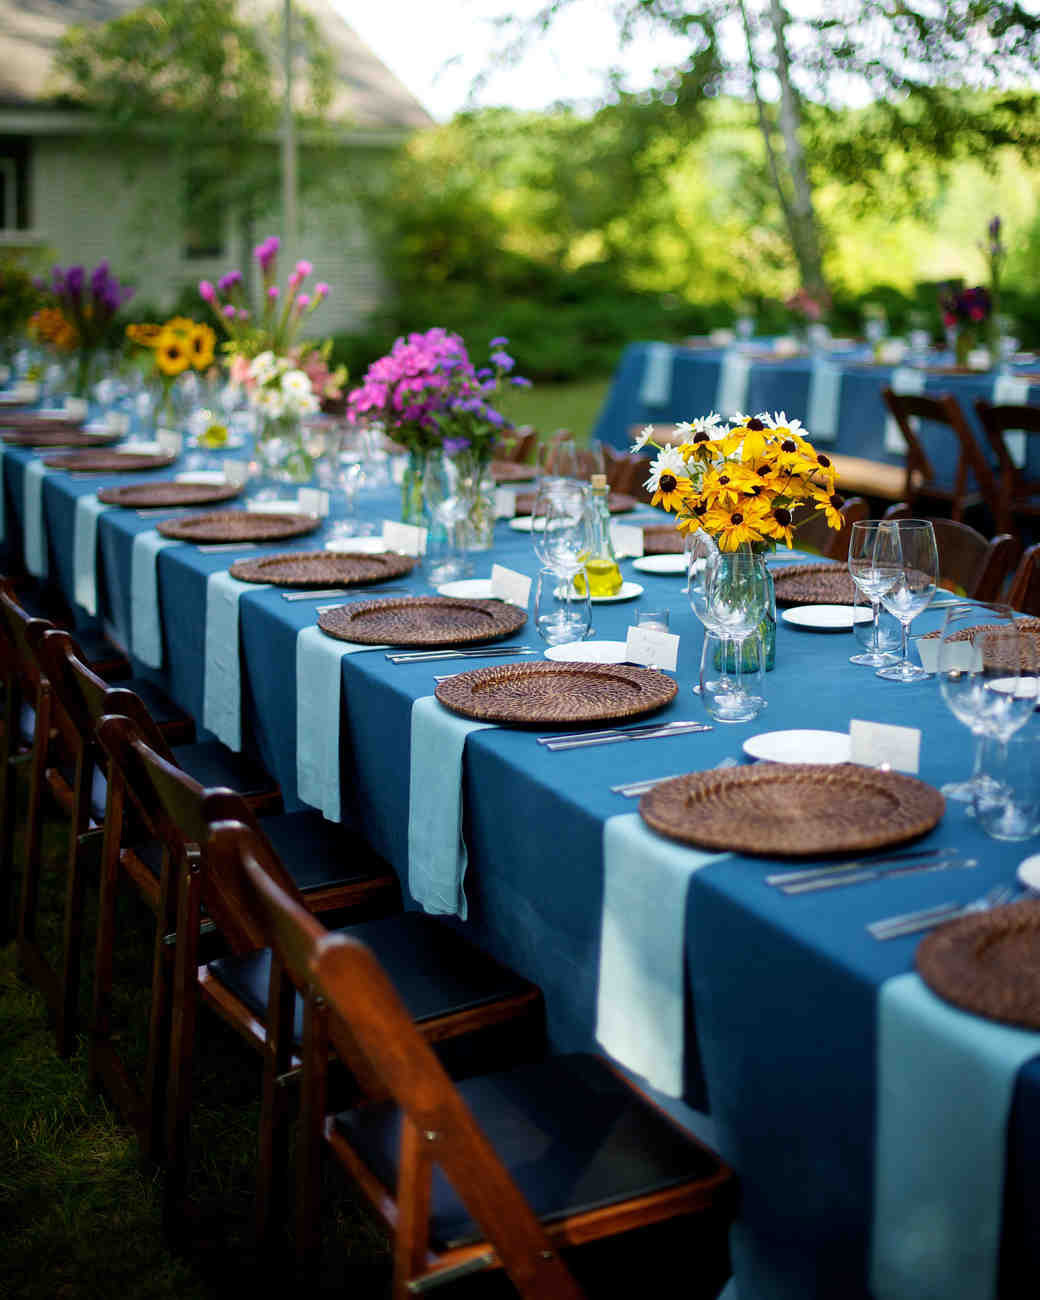 Ideas For An Engagement Party At Home
 How to Throw the Perfect Backyard Engagement Party